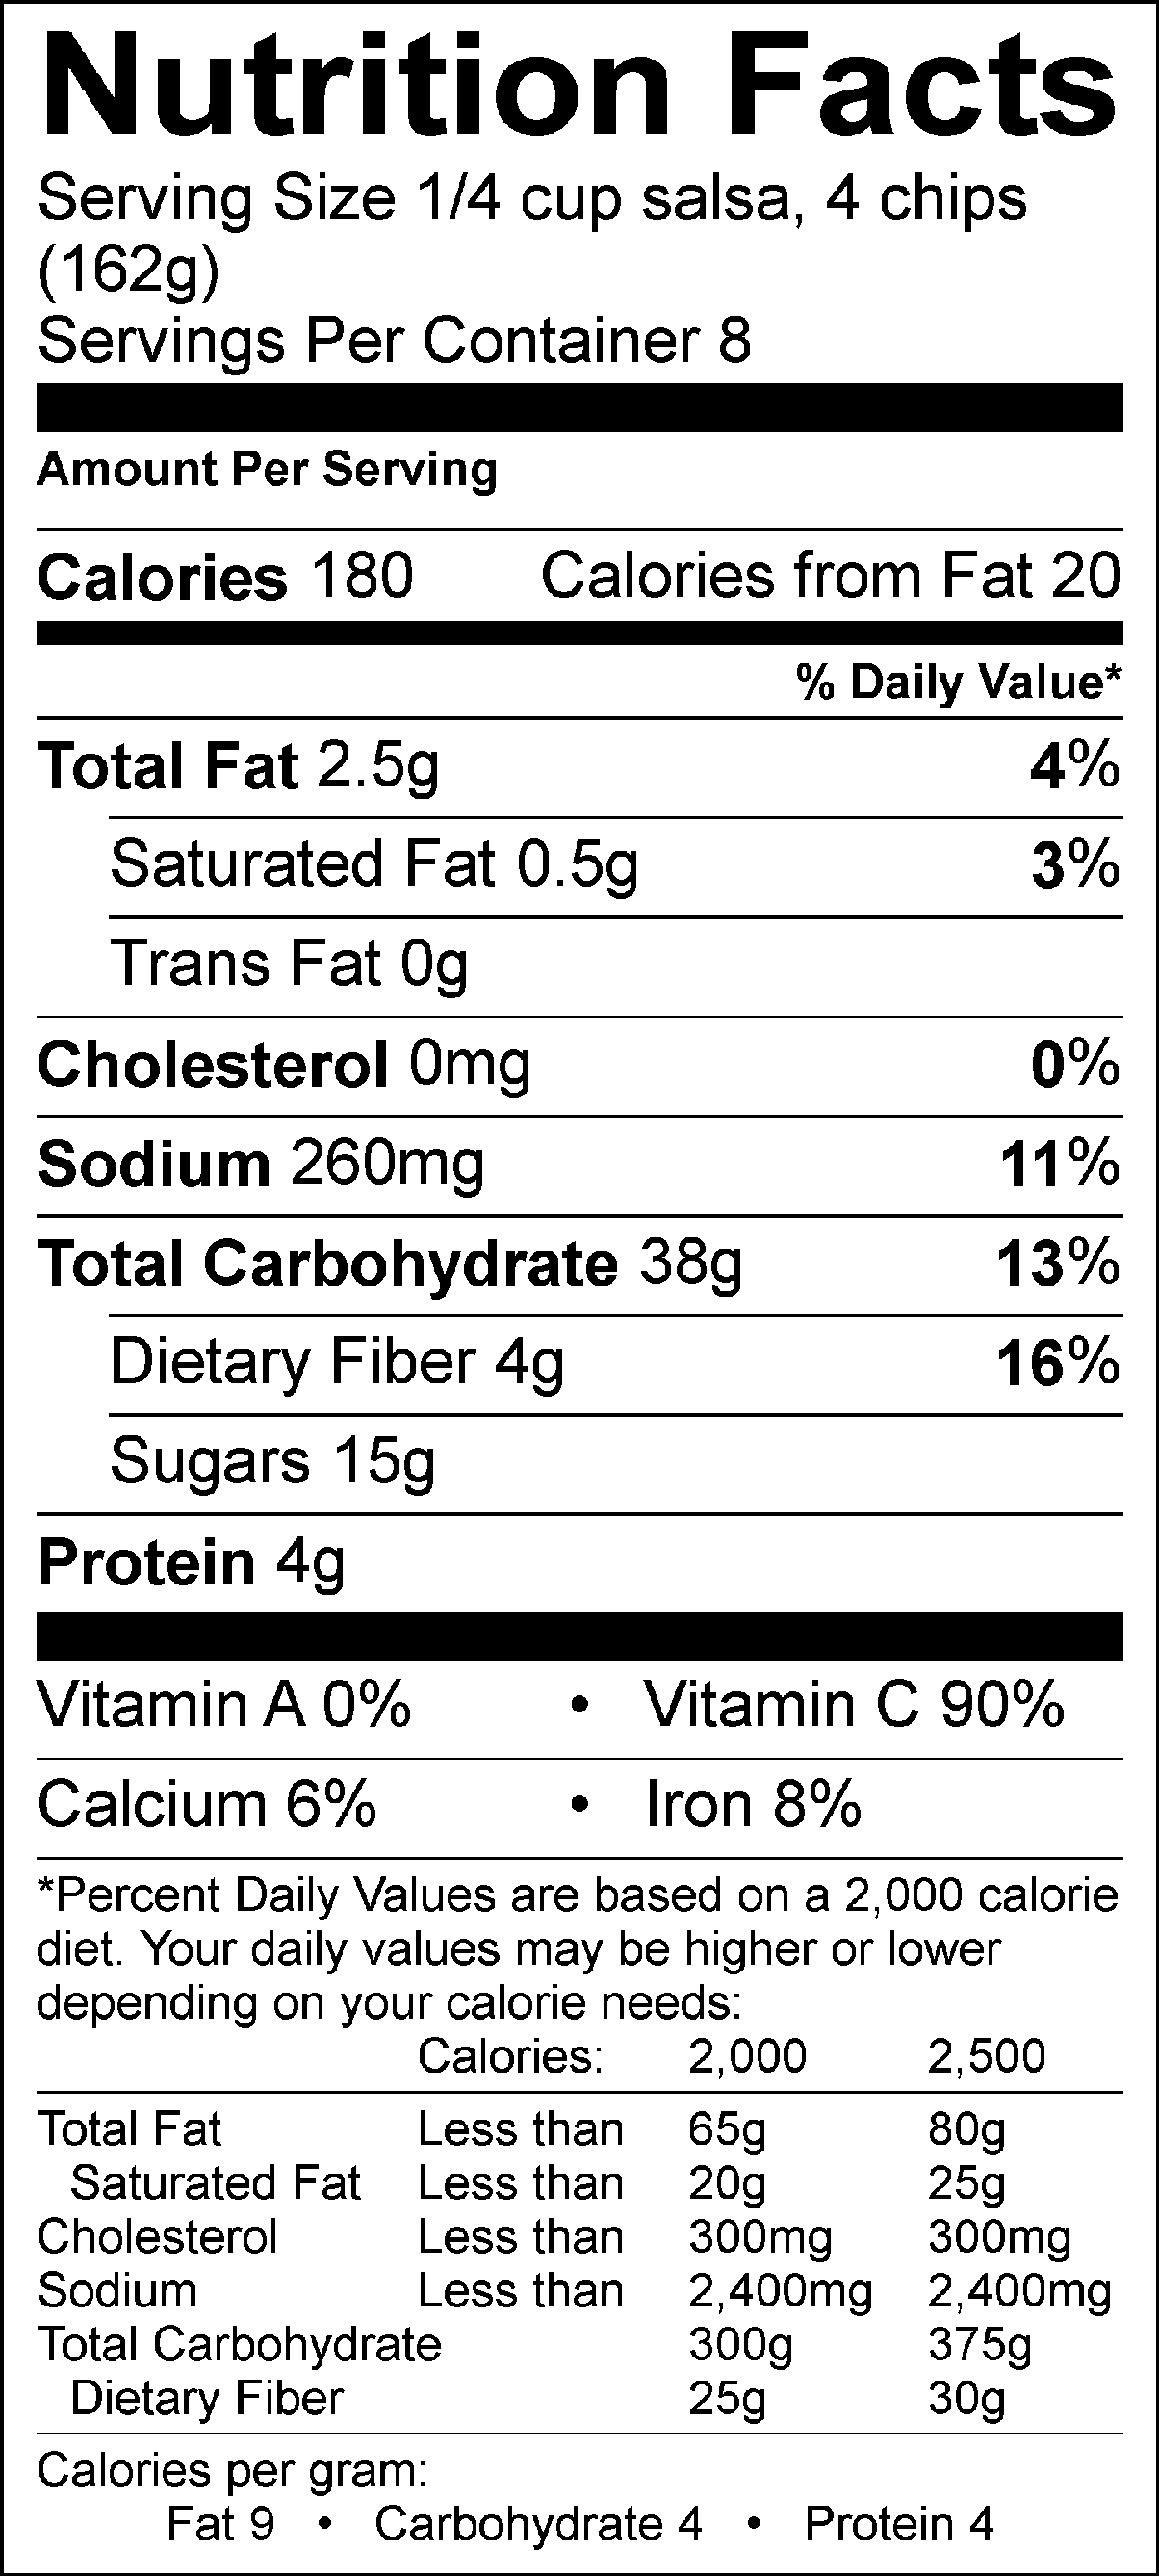 Nutrition Facts Label for Fruit Salsa and Cinnamon Chips